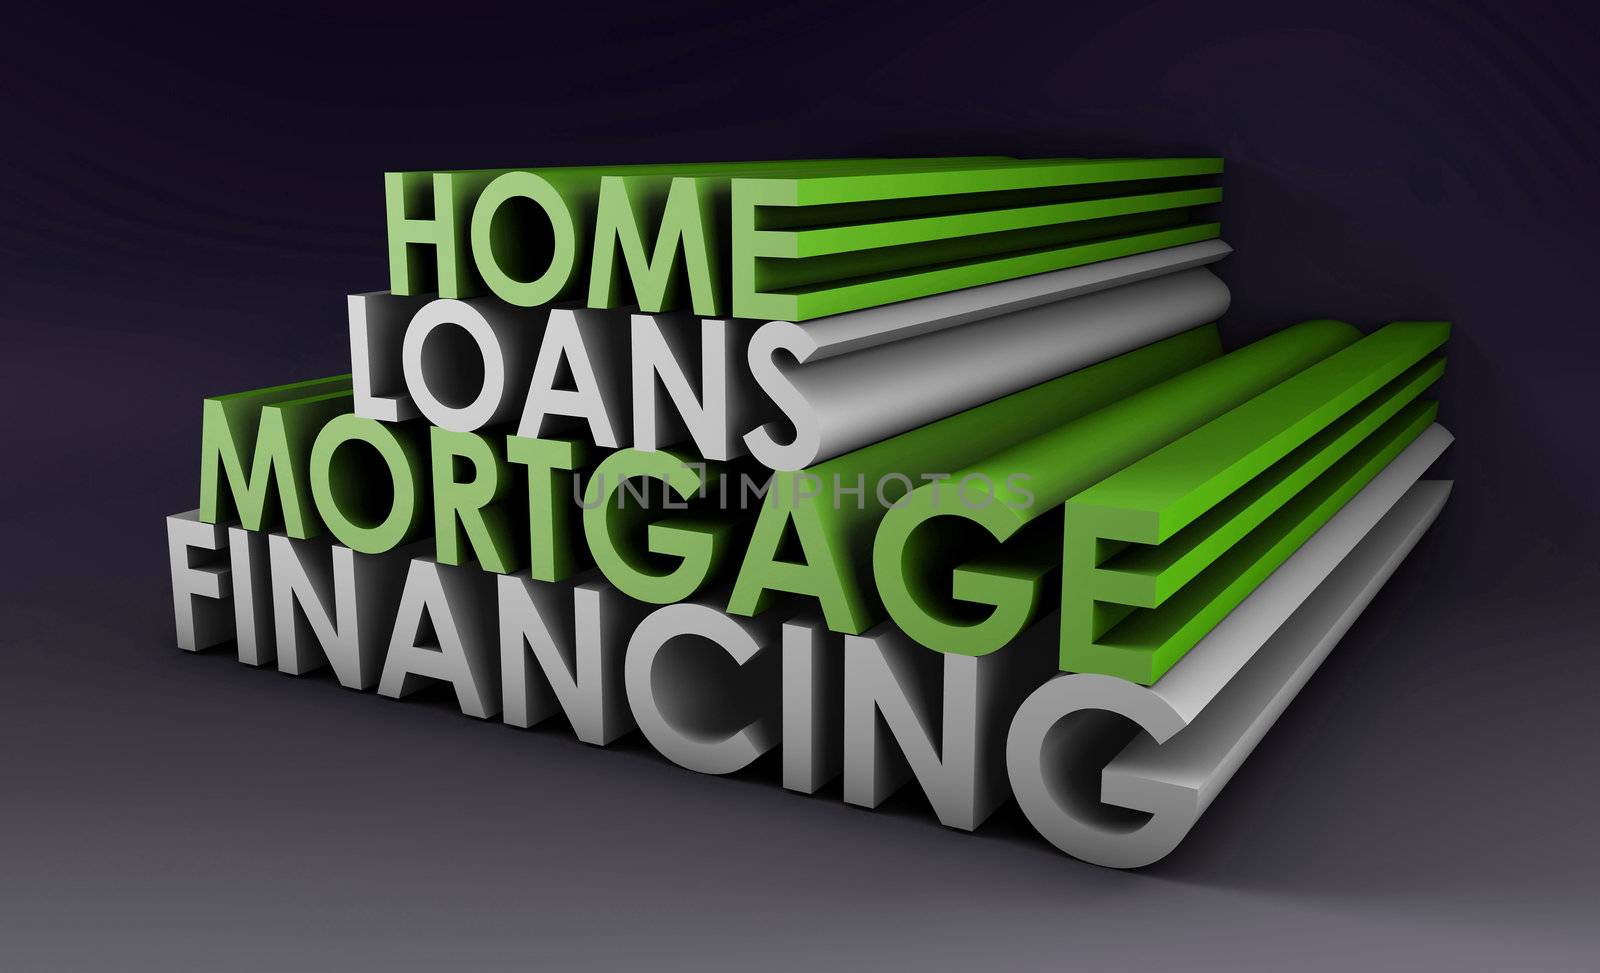 Home Loans Mortgage Financing Concept in 3d